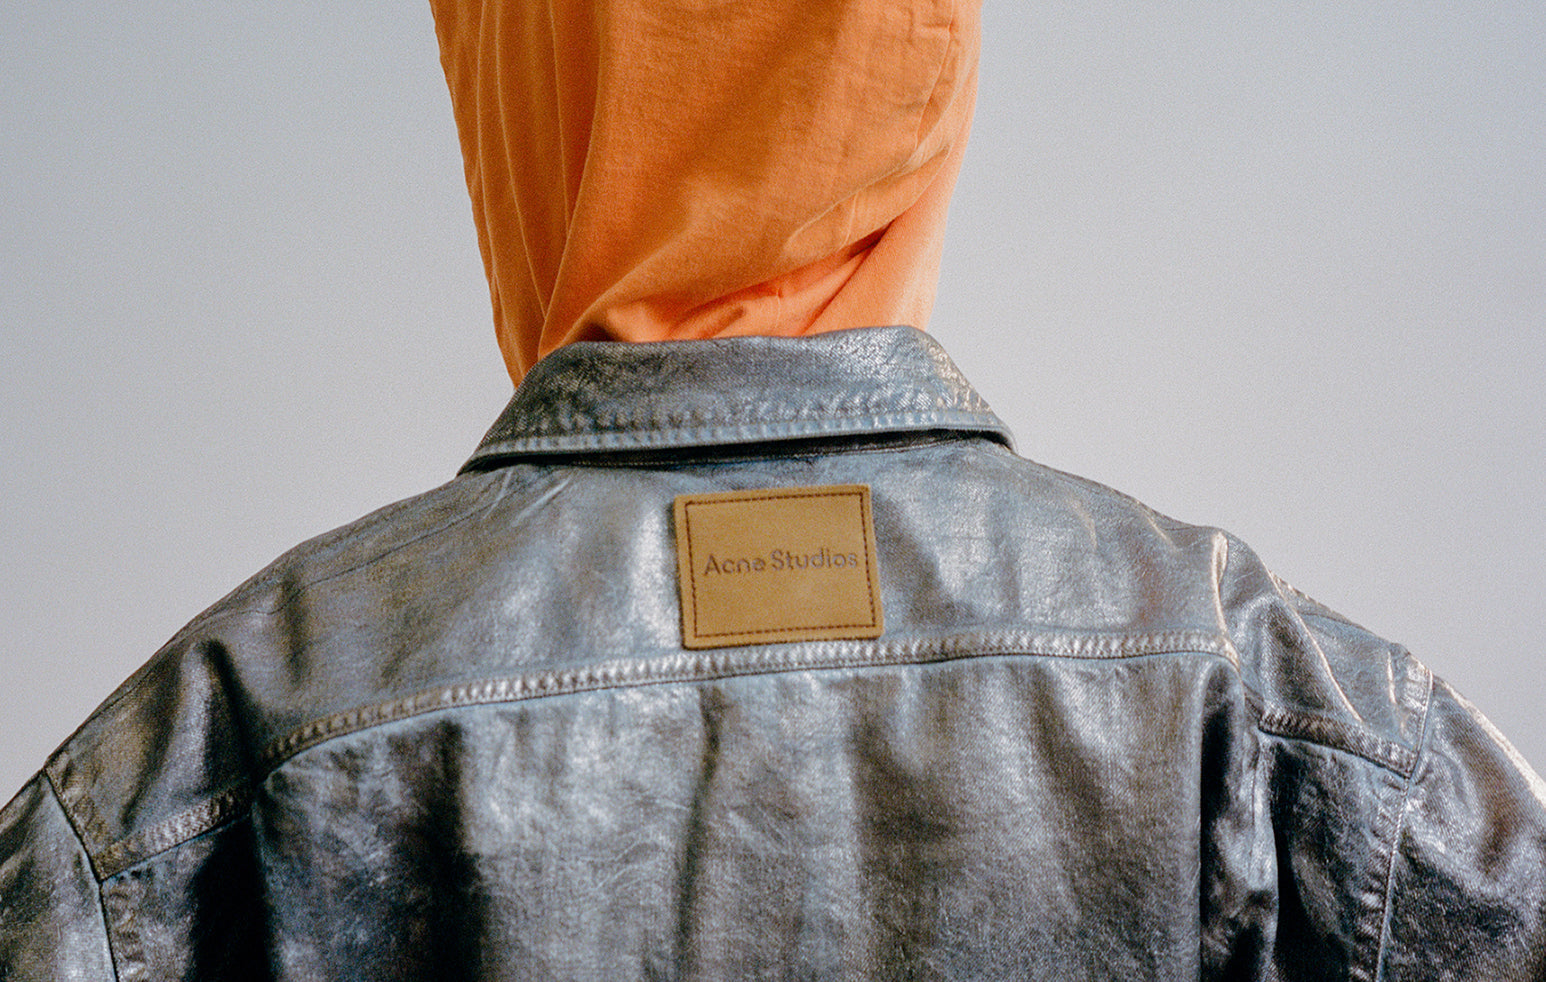 A man standing with his back turned, wearing a hood and a denim jacket